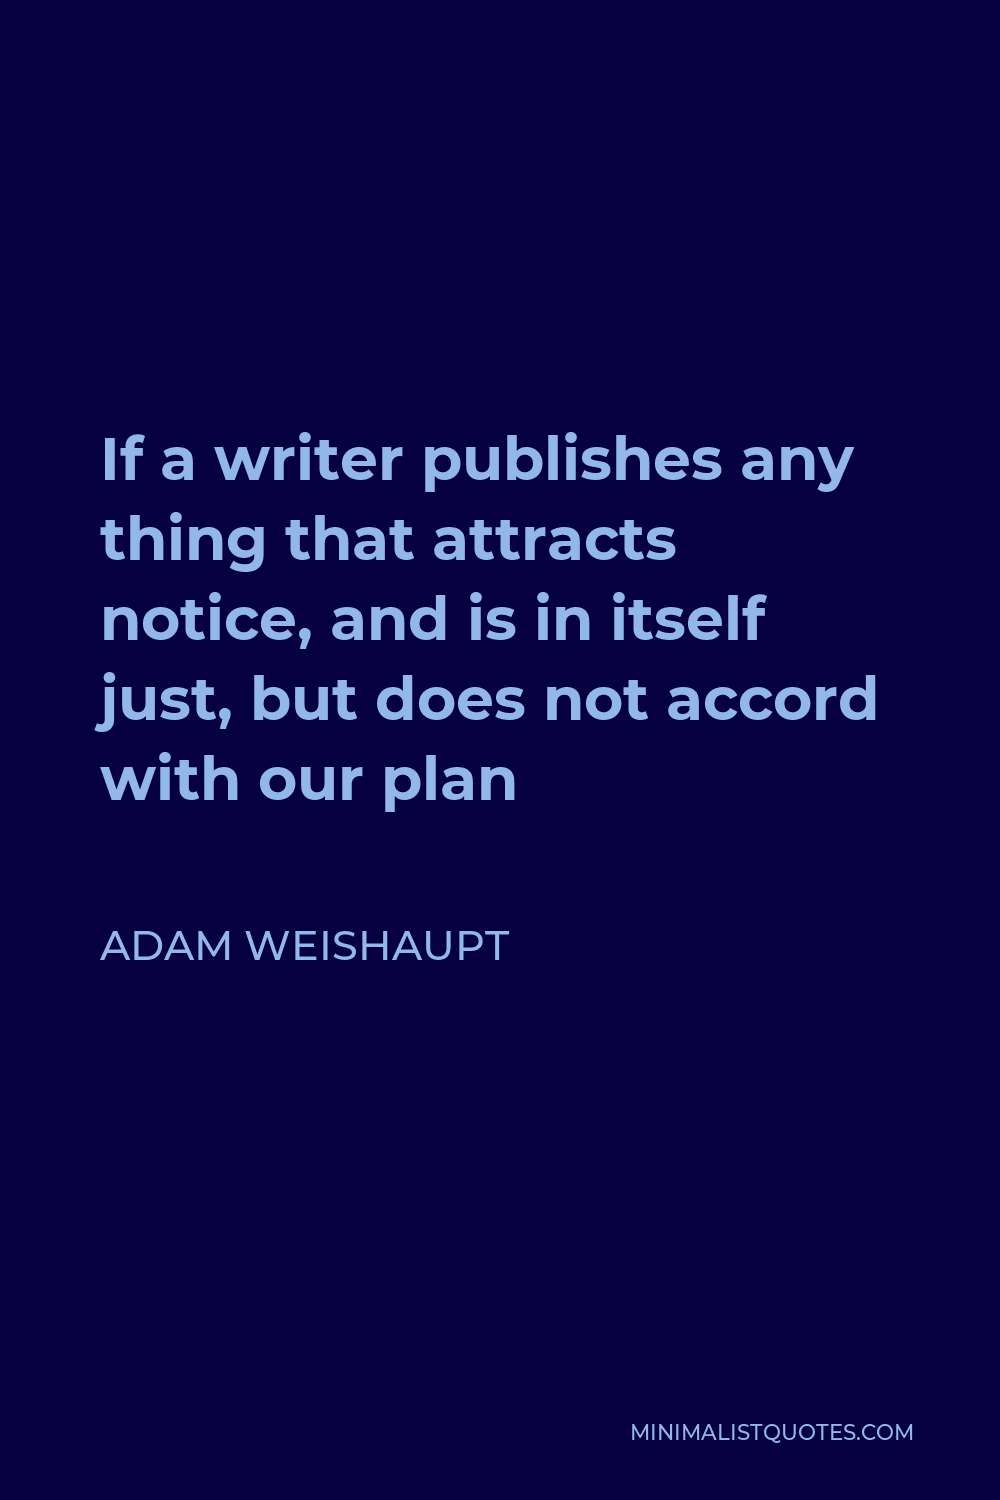 Adam Weishaupt Quote - If a writer publishes any thing that attracts notice, and is in itself just, but does not accord with our plan